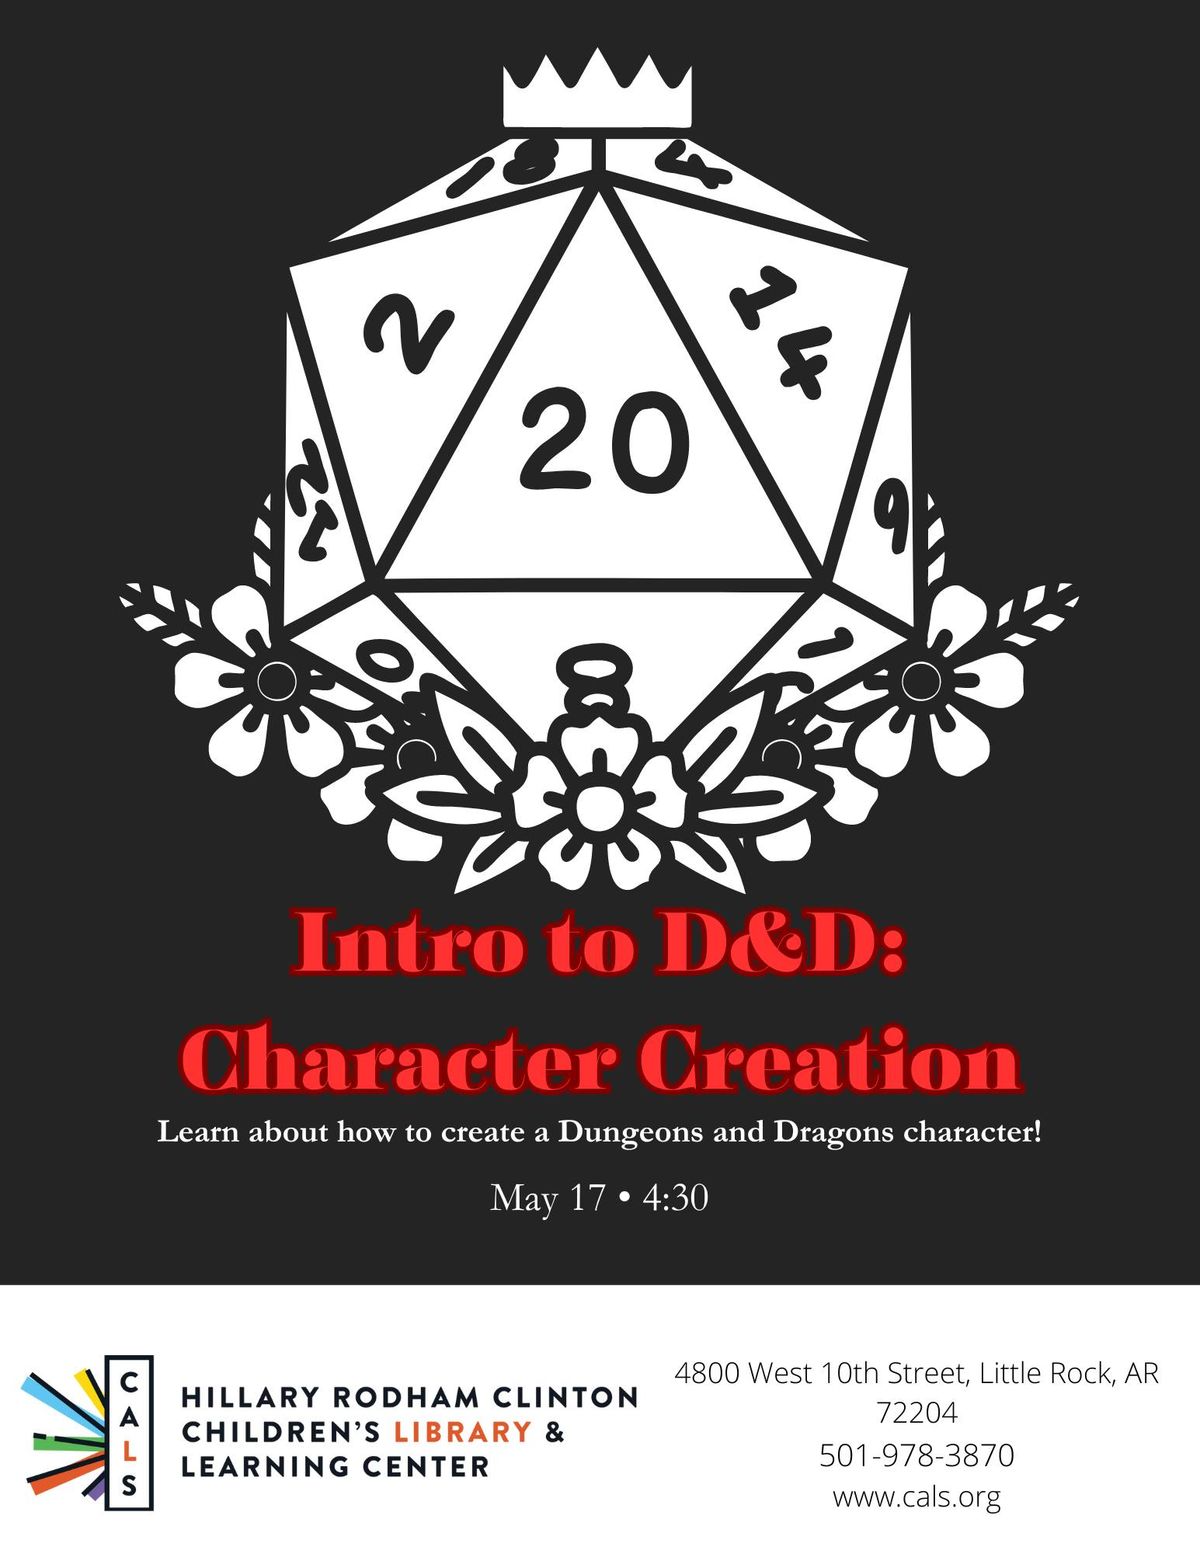 Intro to DND: Character Creation